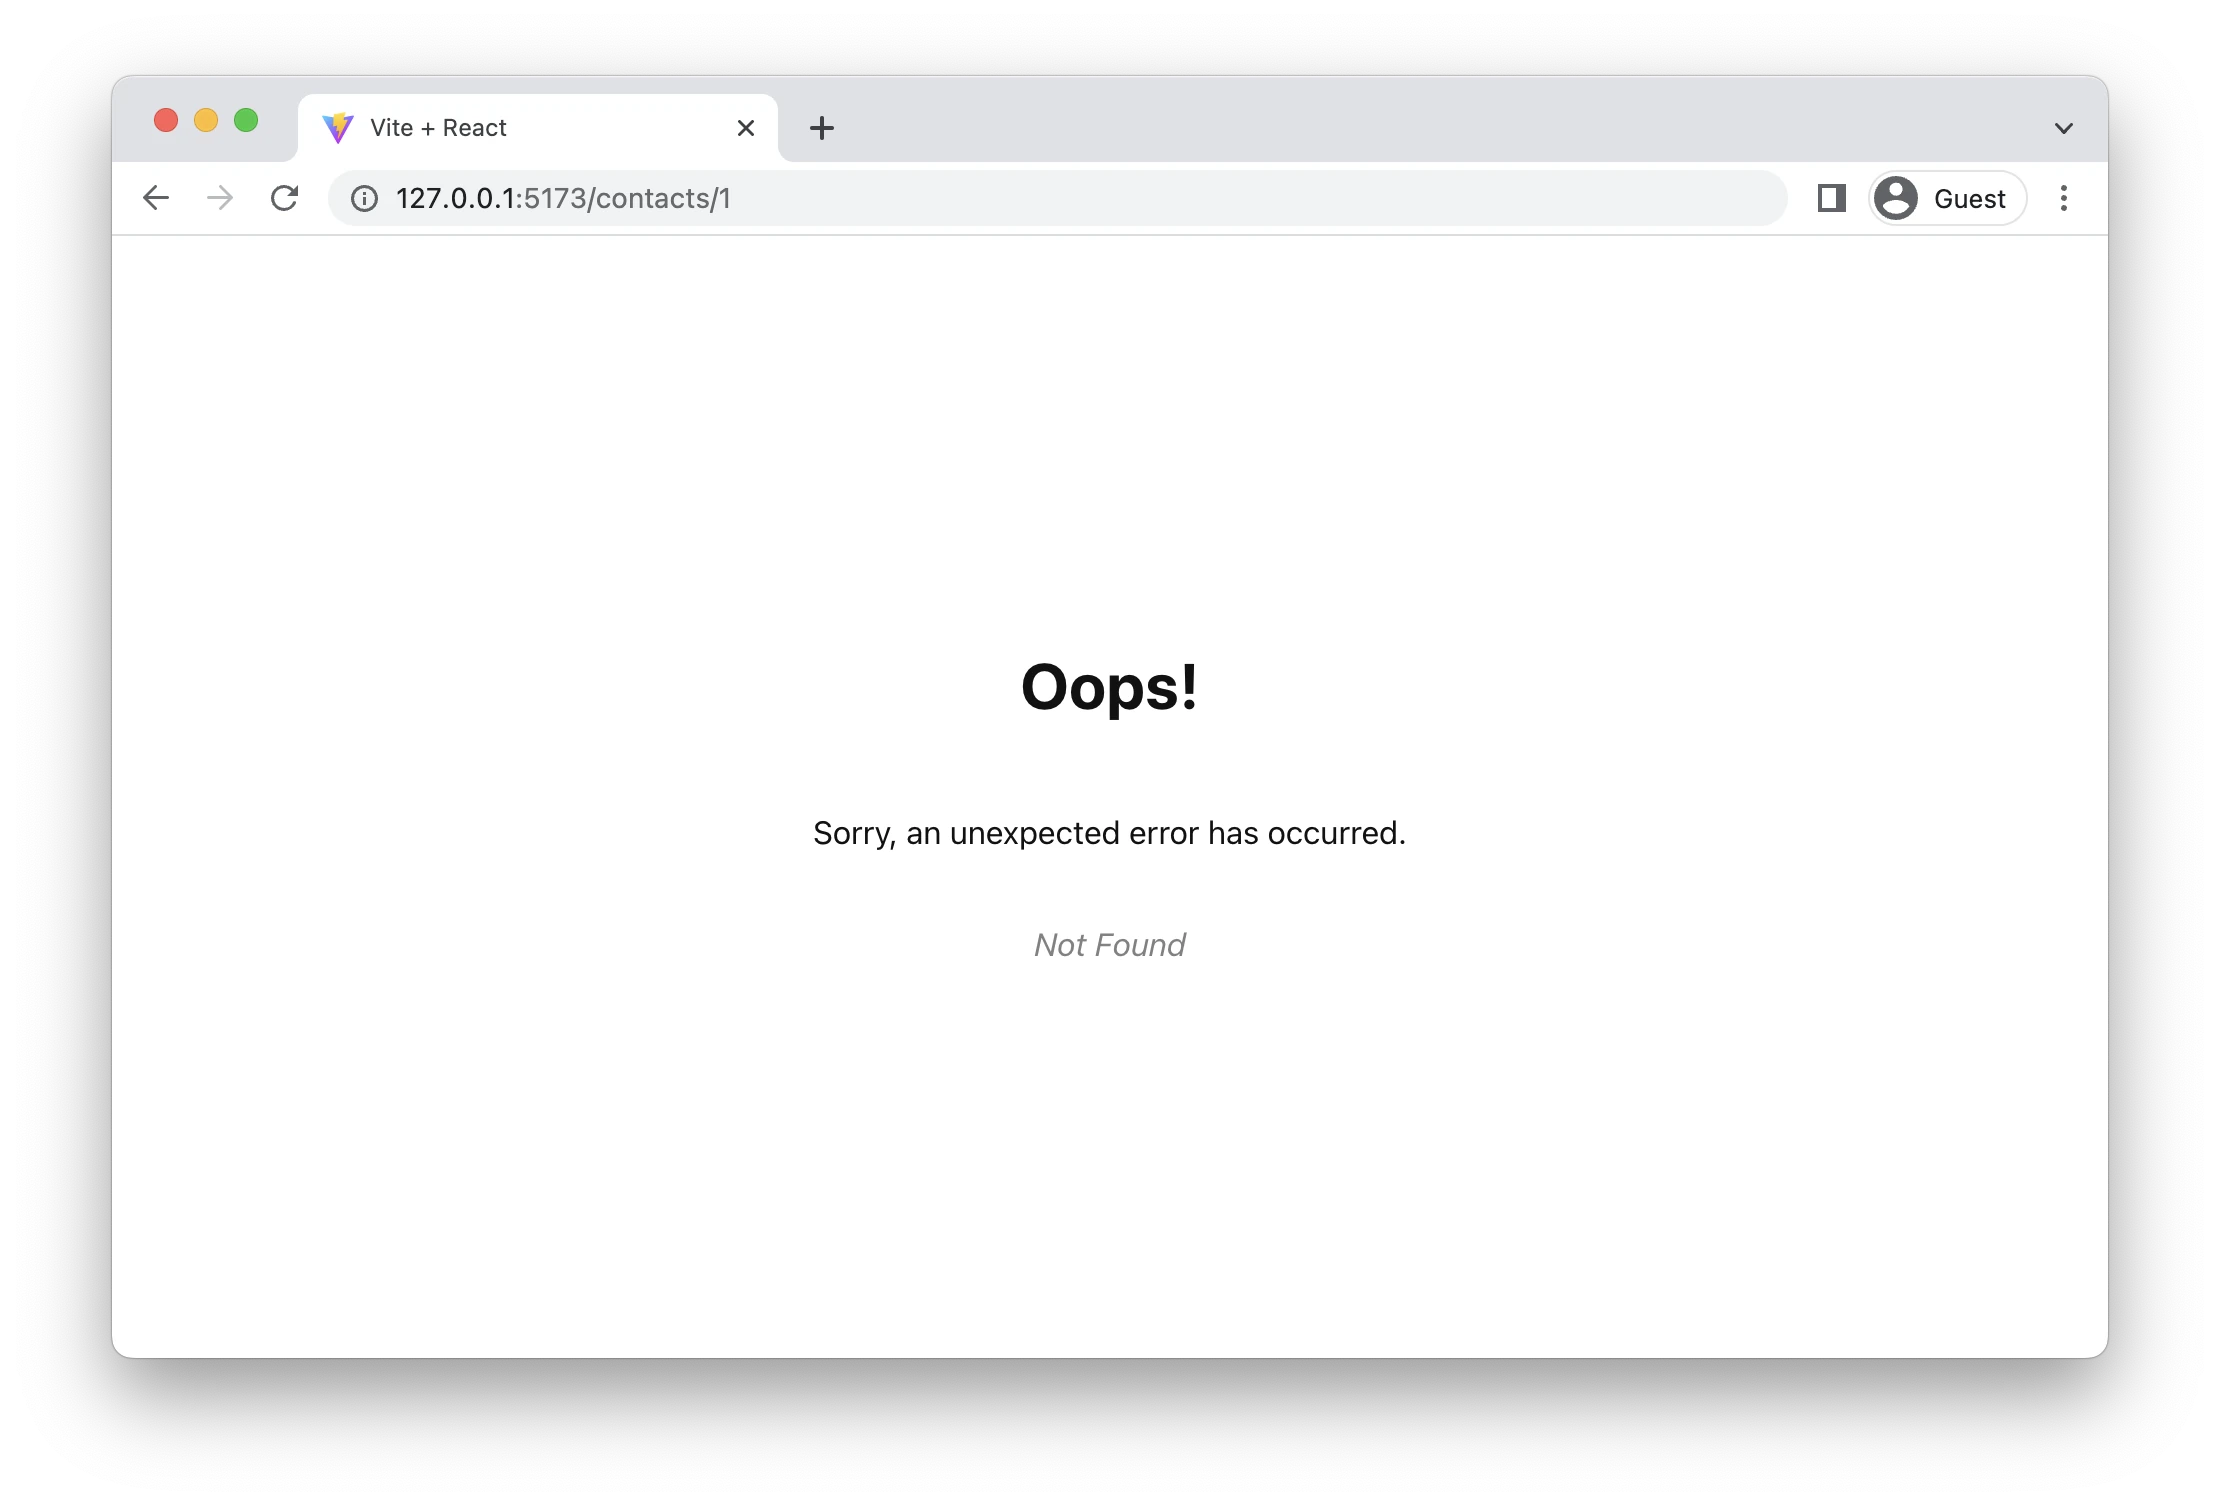 new error page, but still ugly